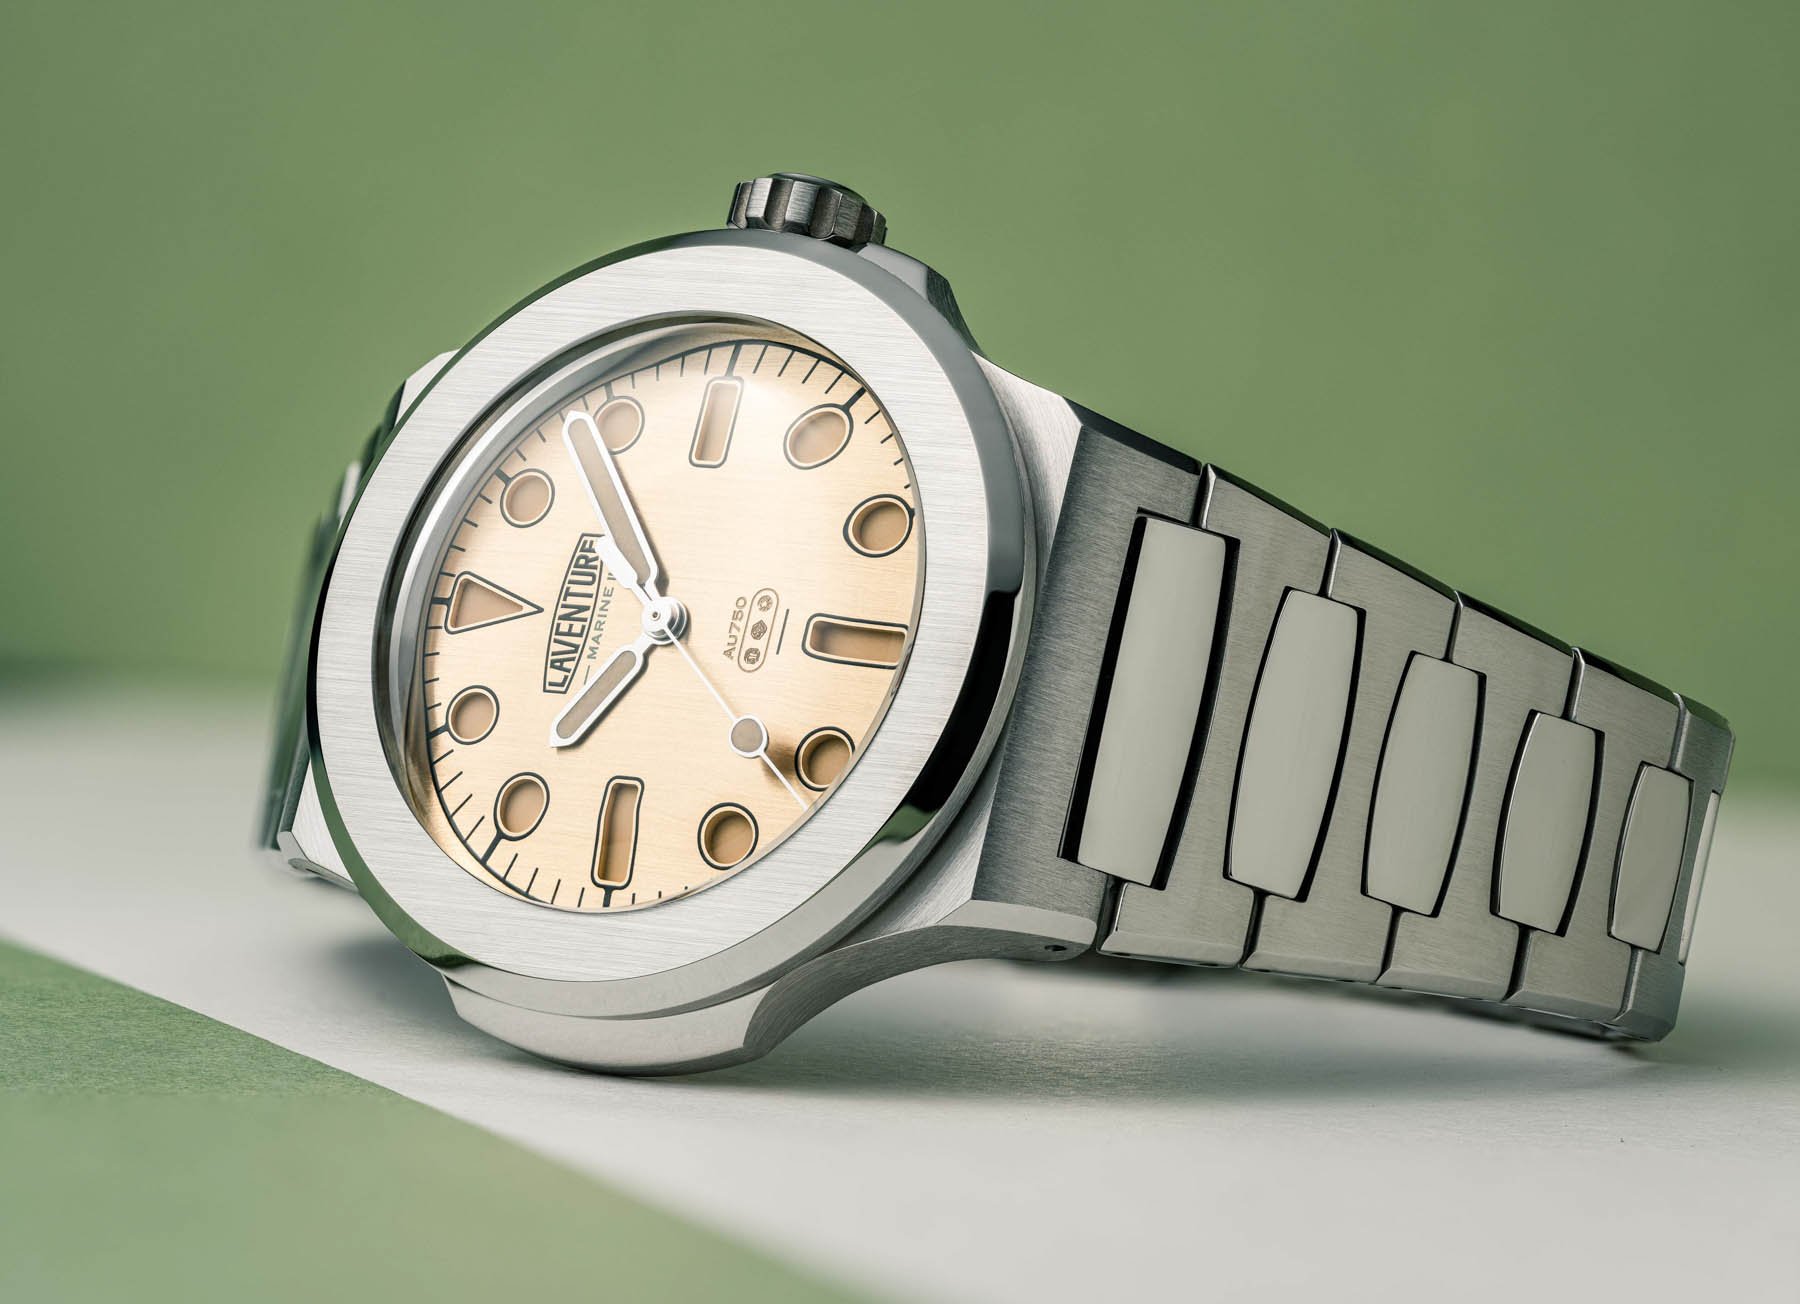 As the Patek Philippe Nautilus 5711 gets discontinued, just how